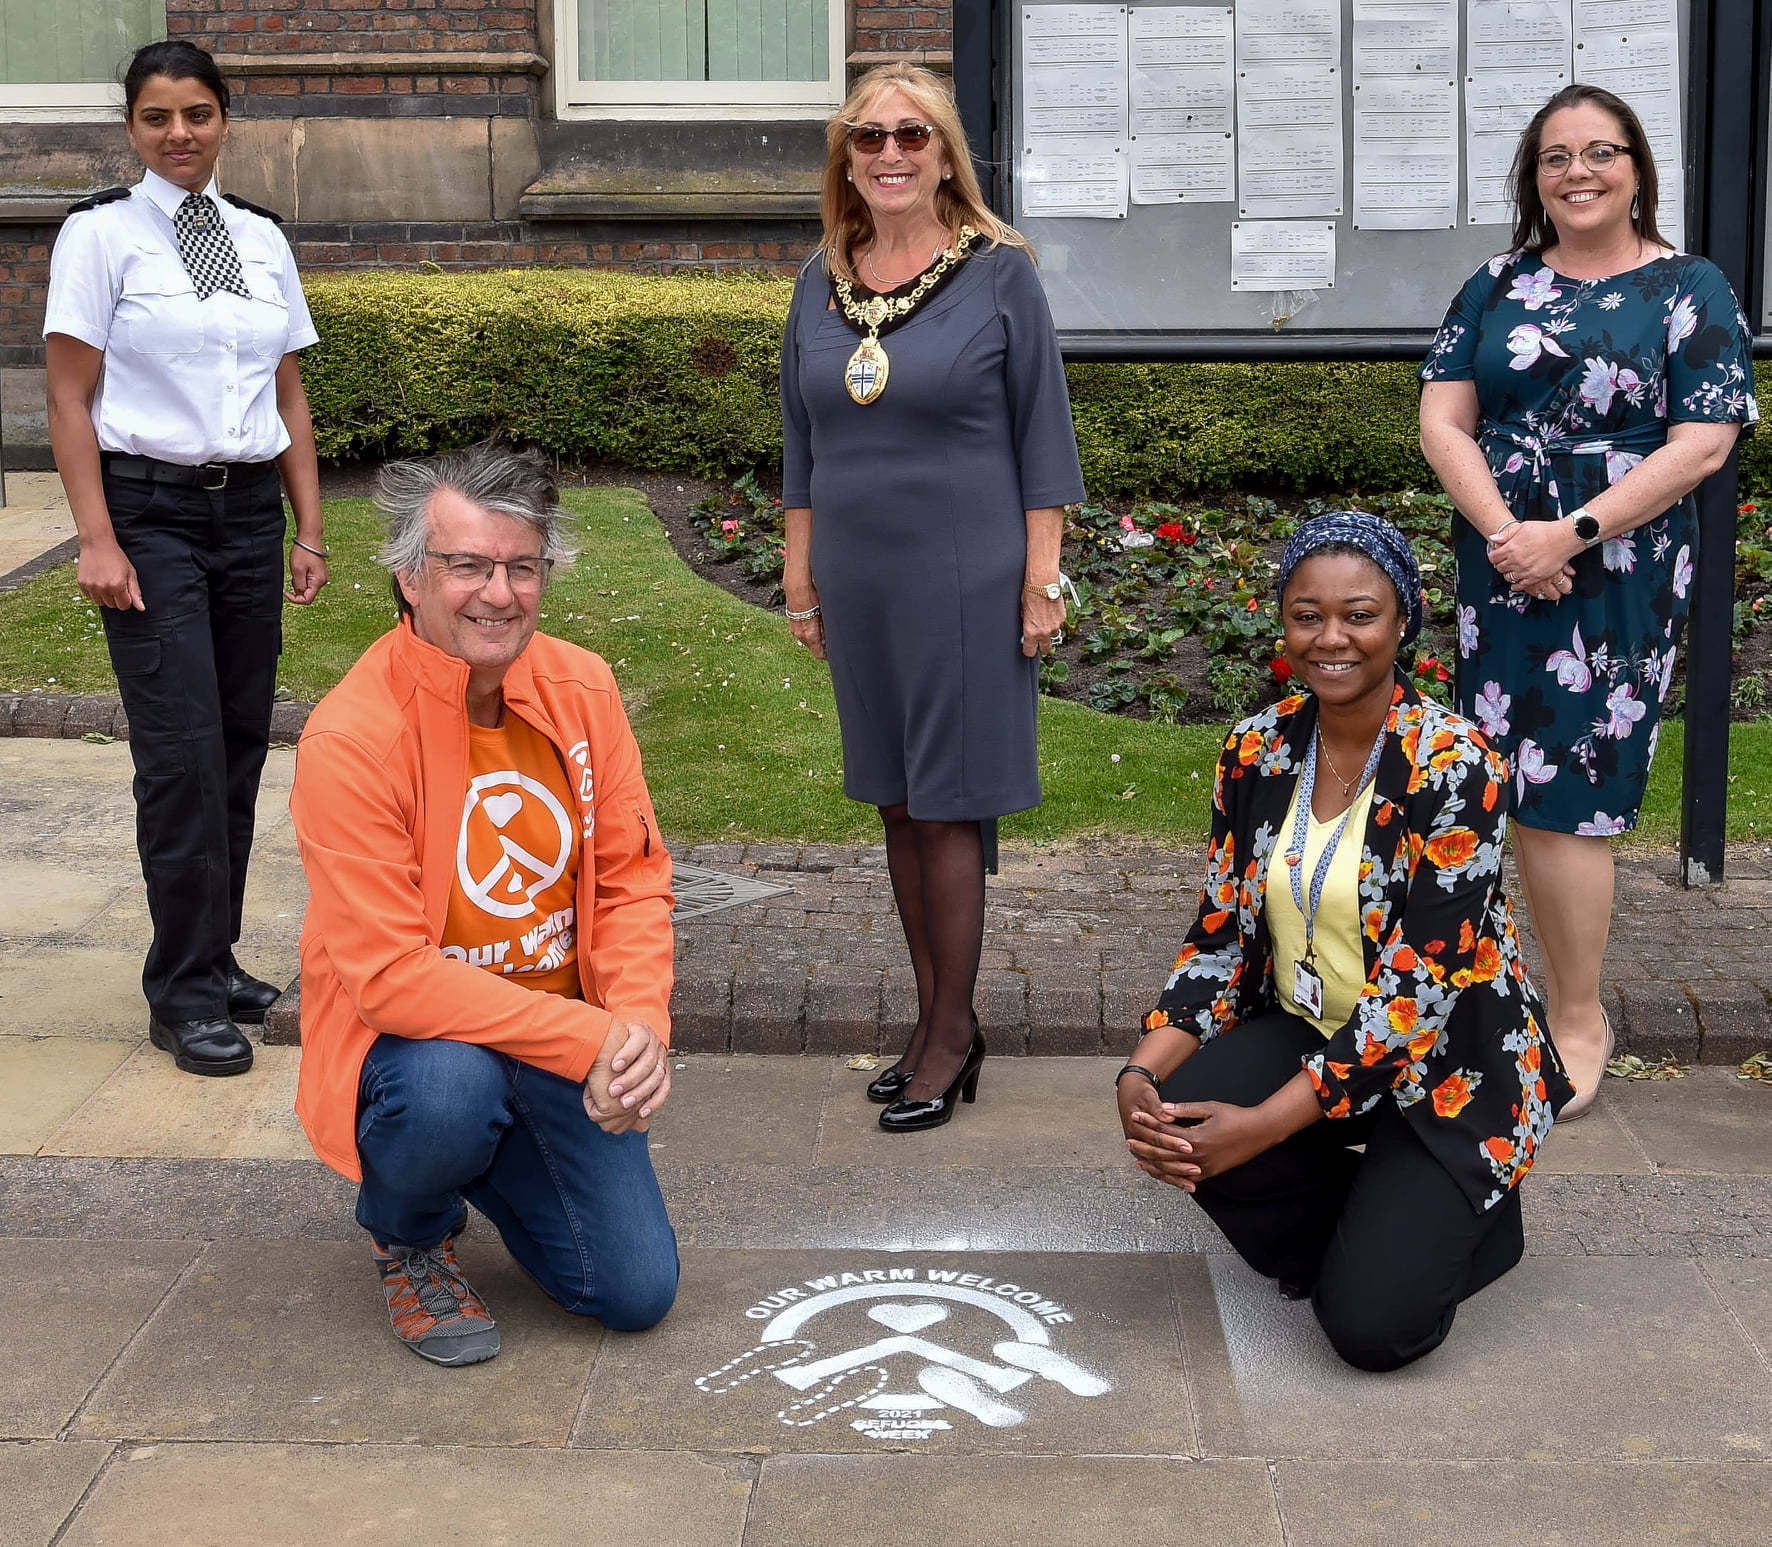 Footstep symbols were painted in St Helens town centre